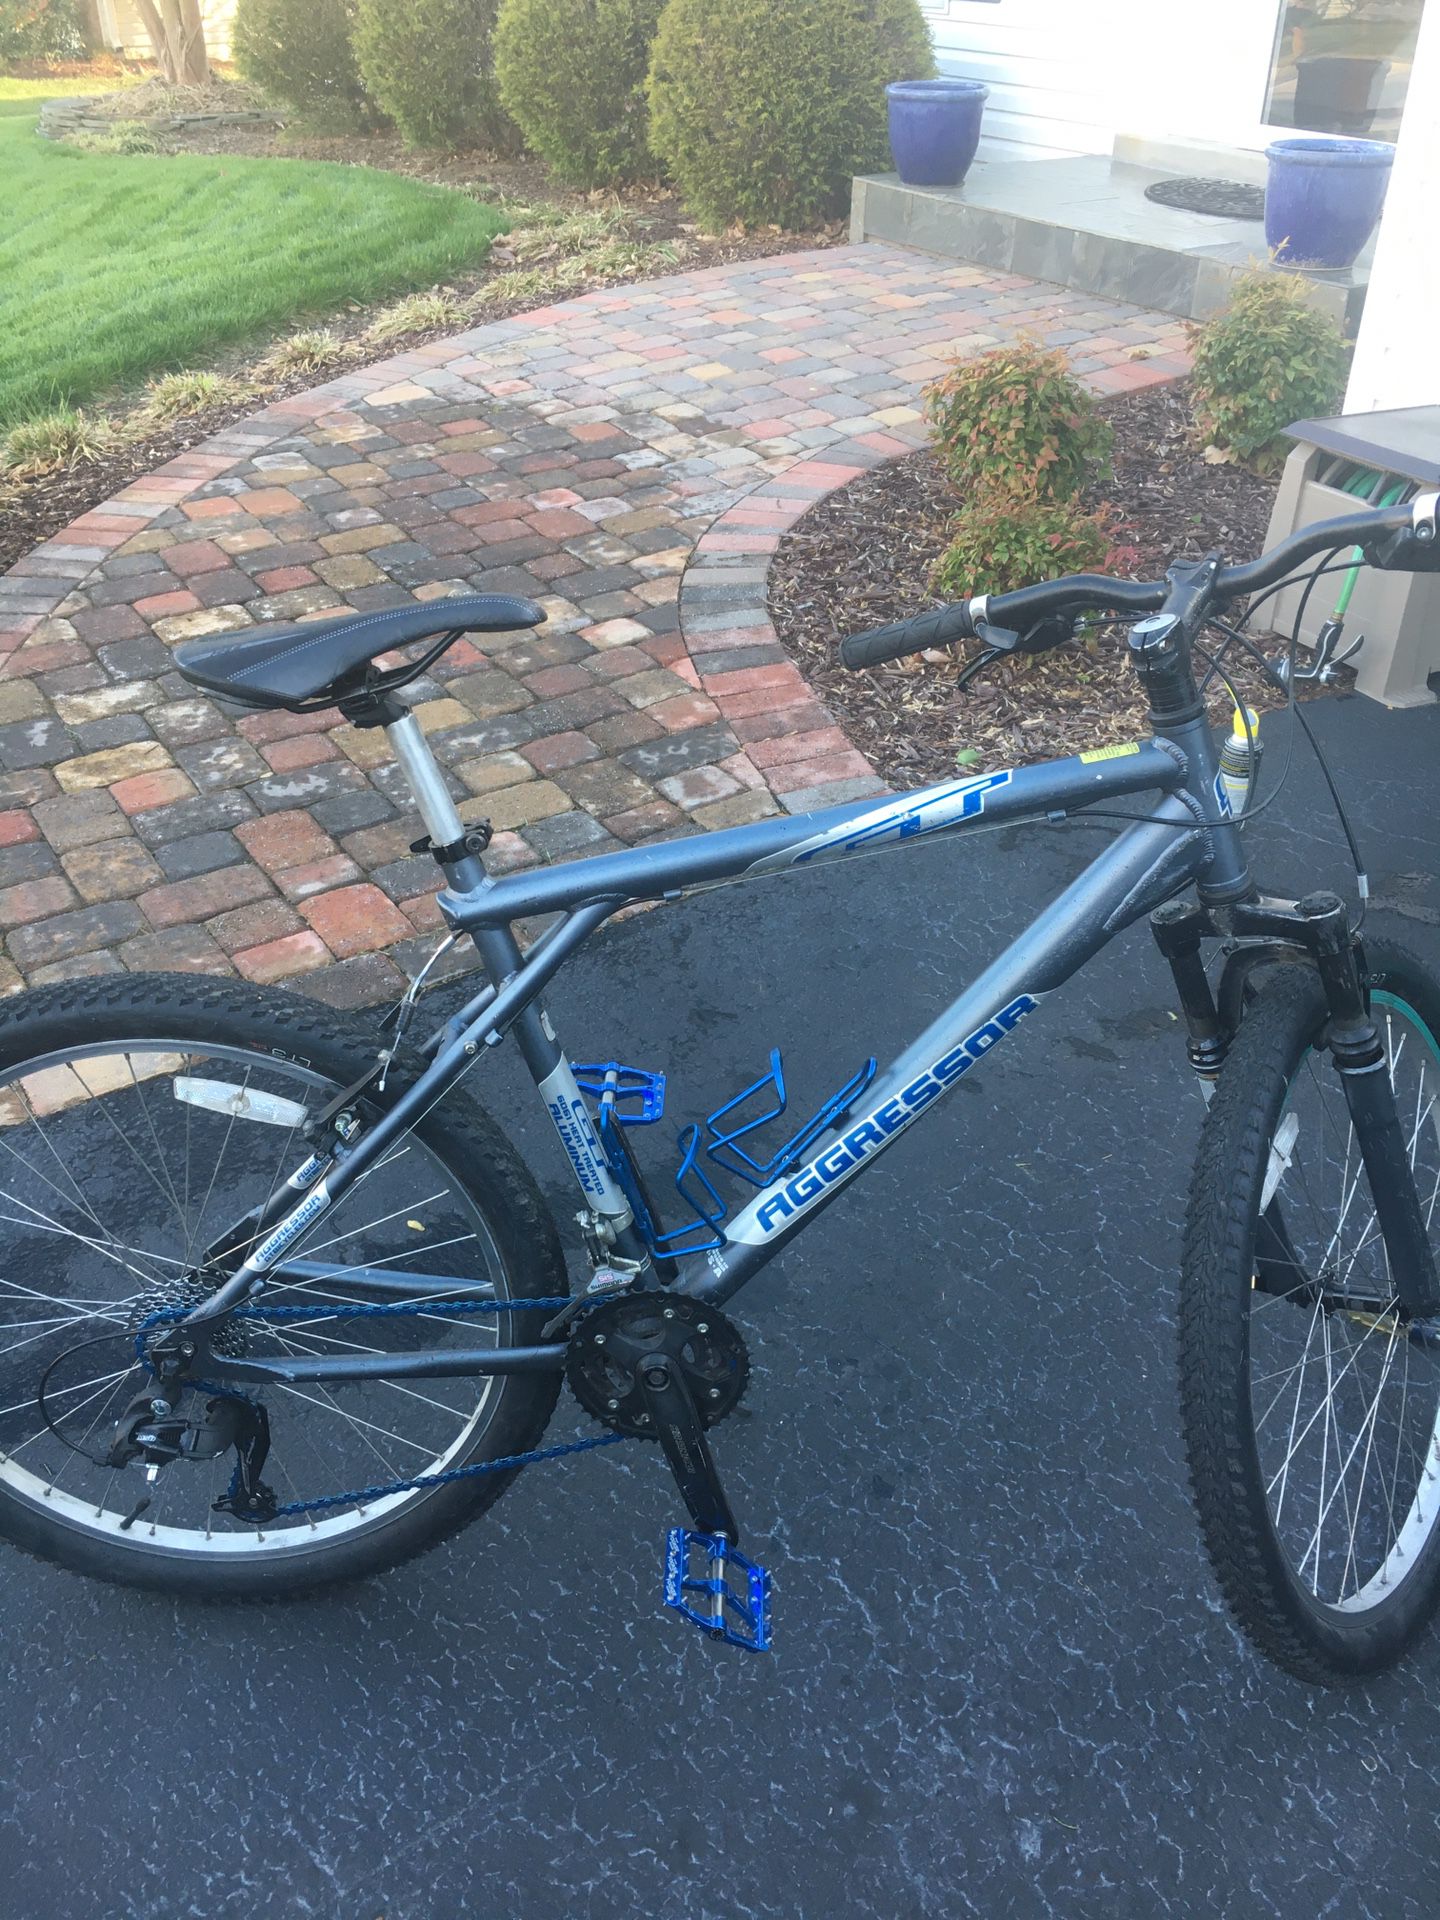 GT aggressor hardtail mountain bike. Large. Aluminum frame. 21 speed. Upgraded. Nicks and scratches.